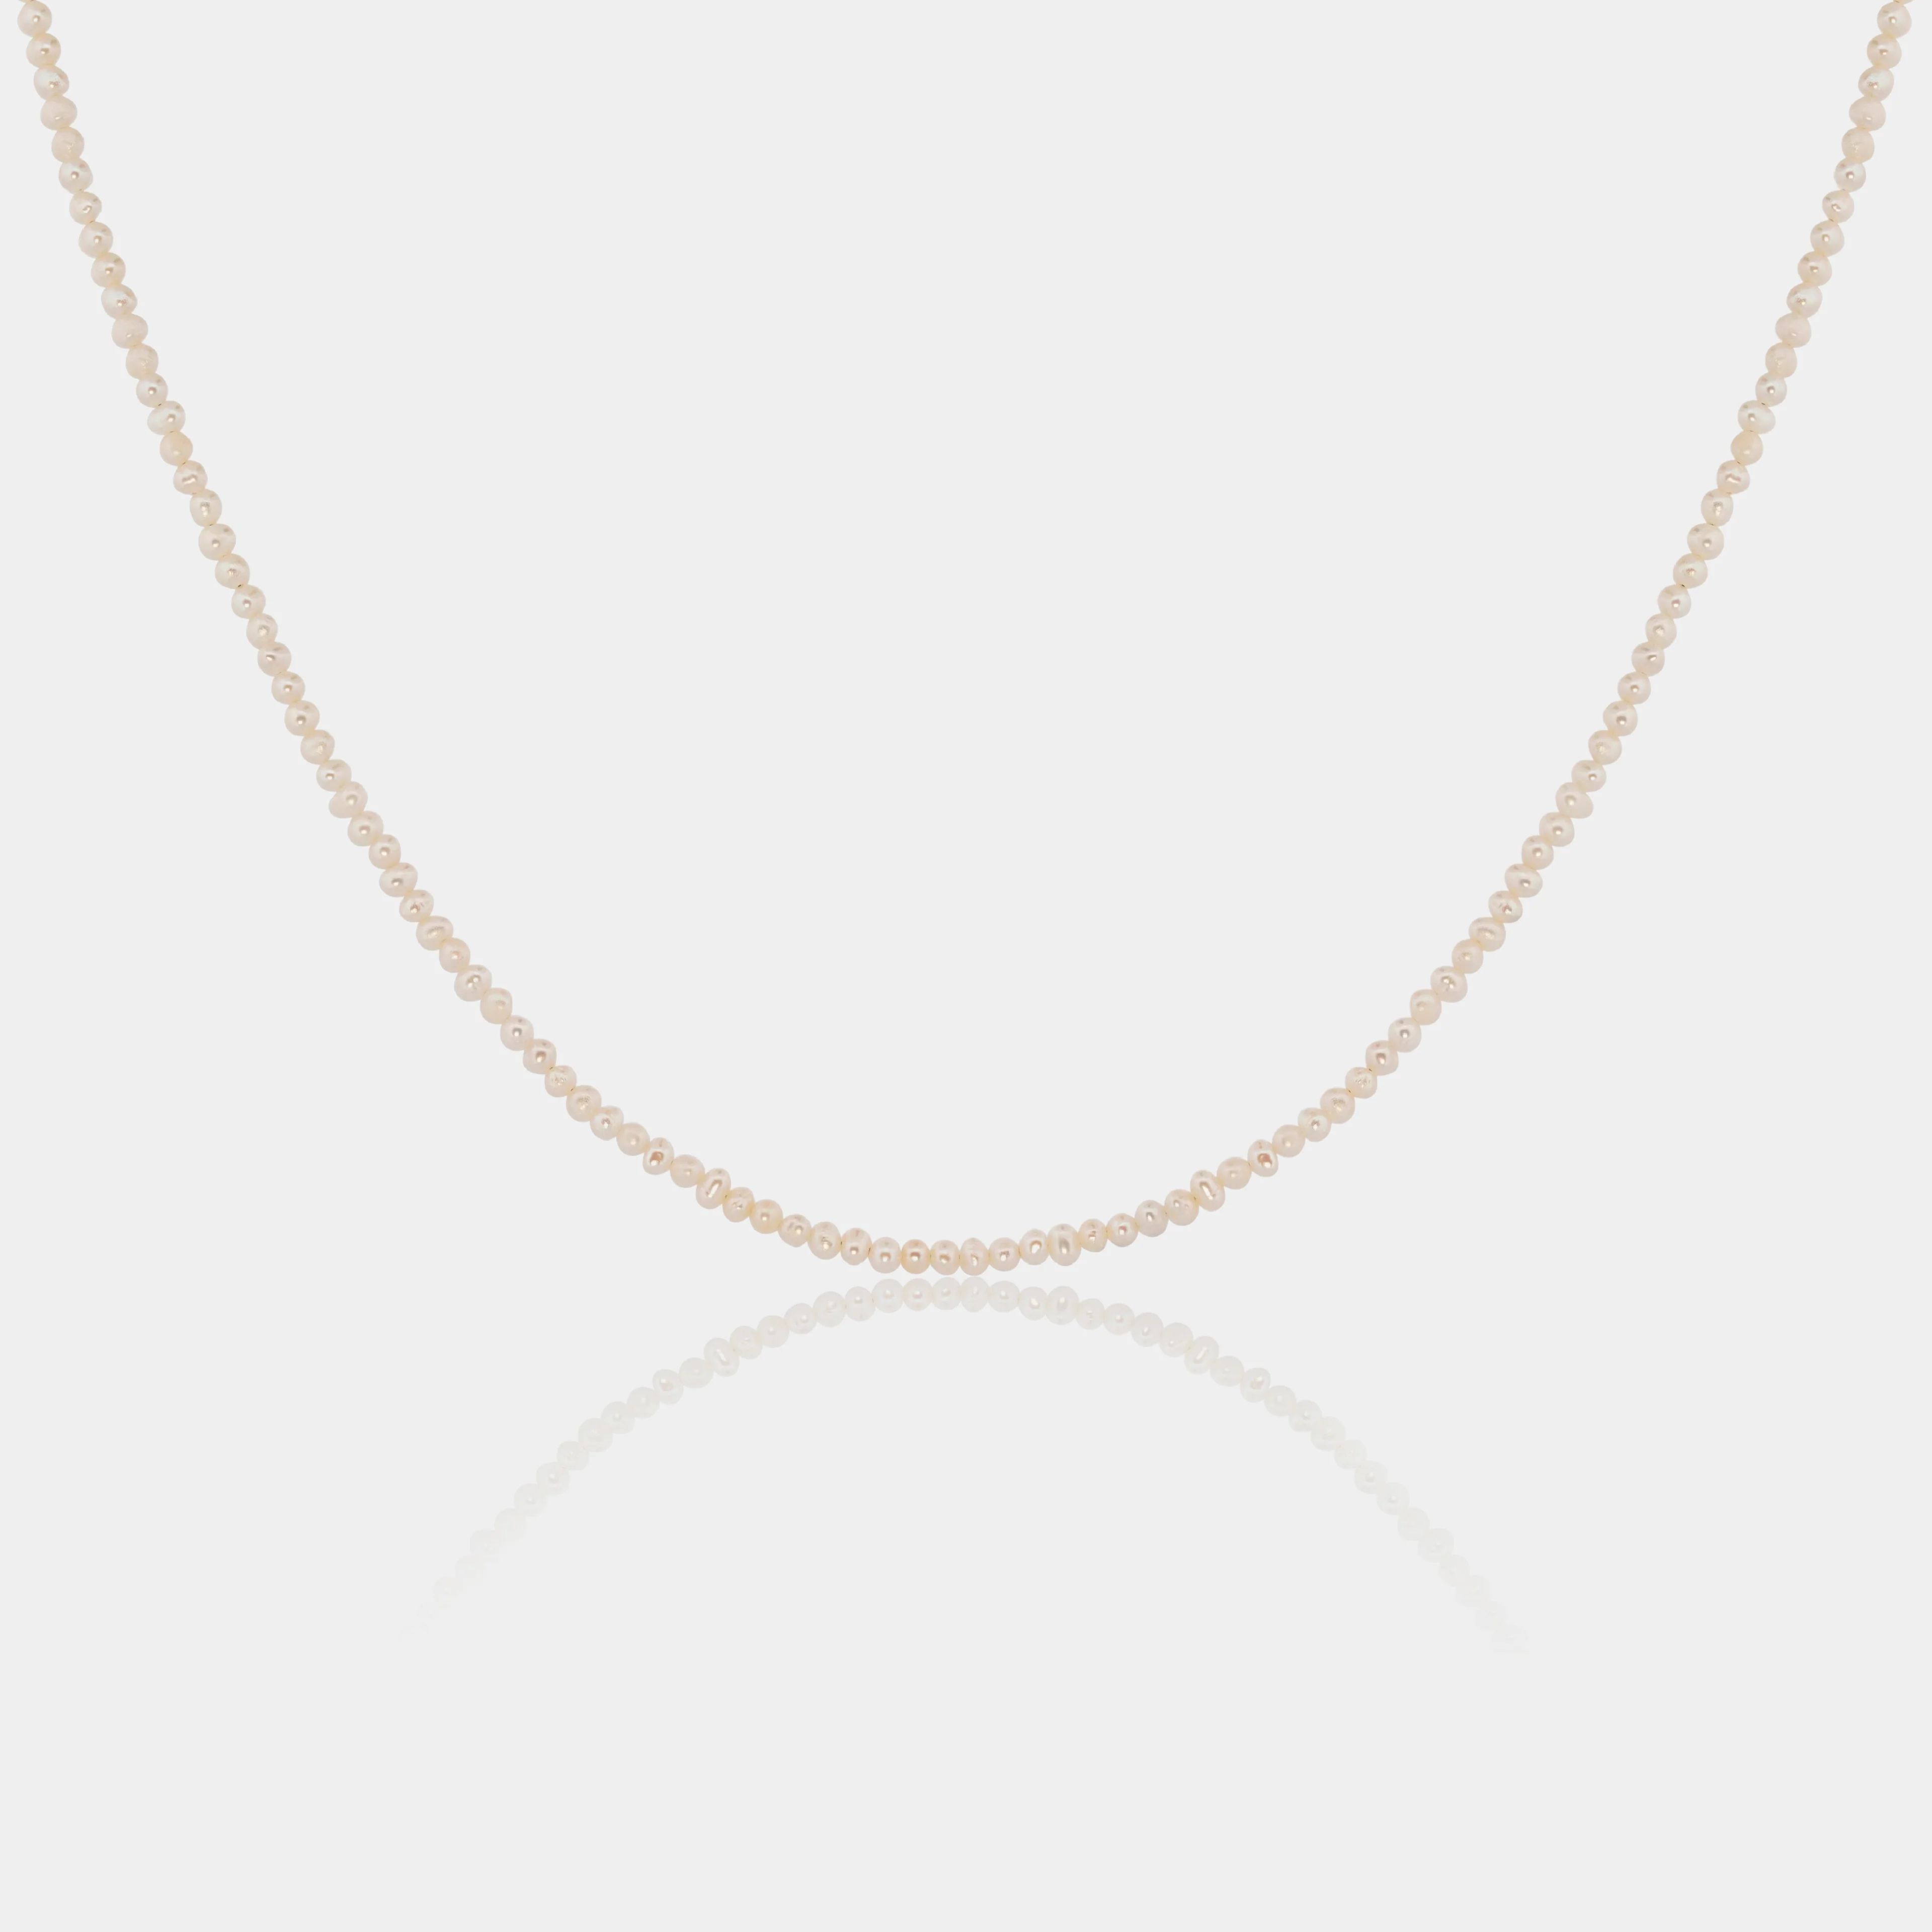 Tiny Pearl Choker Necklace | LINK'D THE LABEL